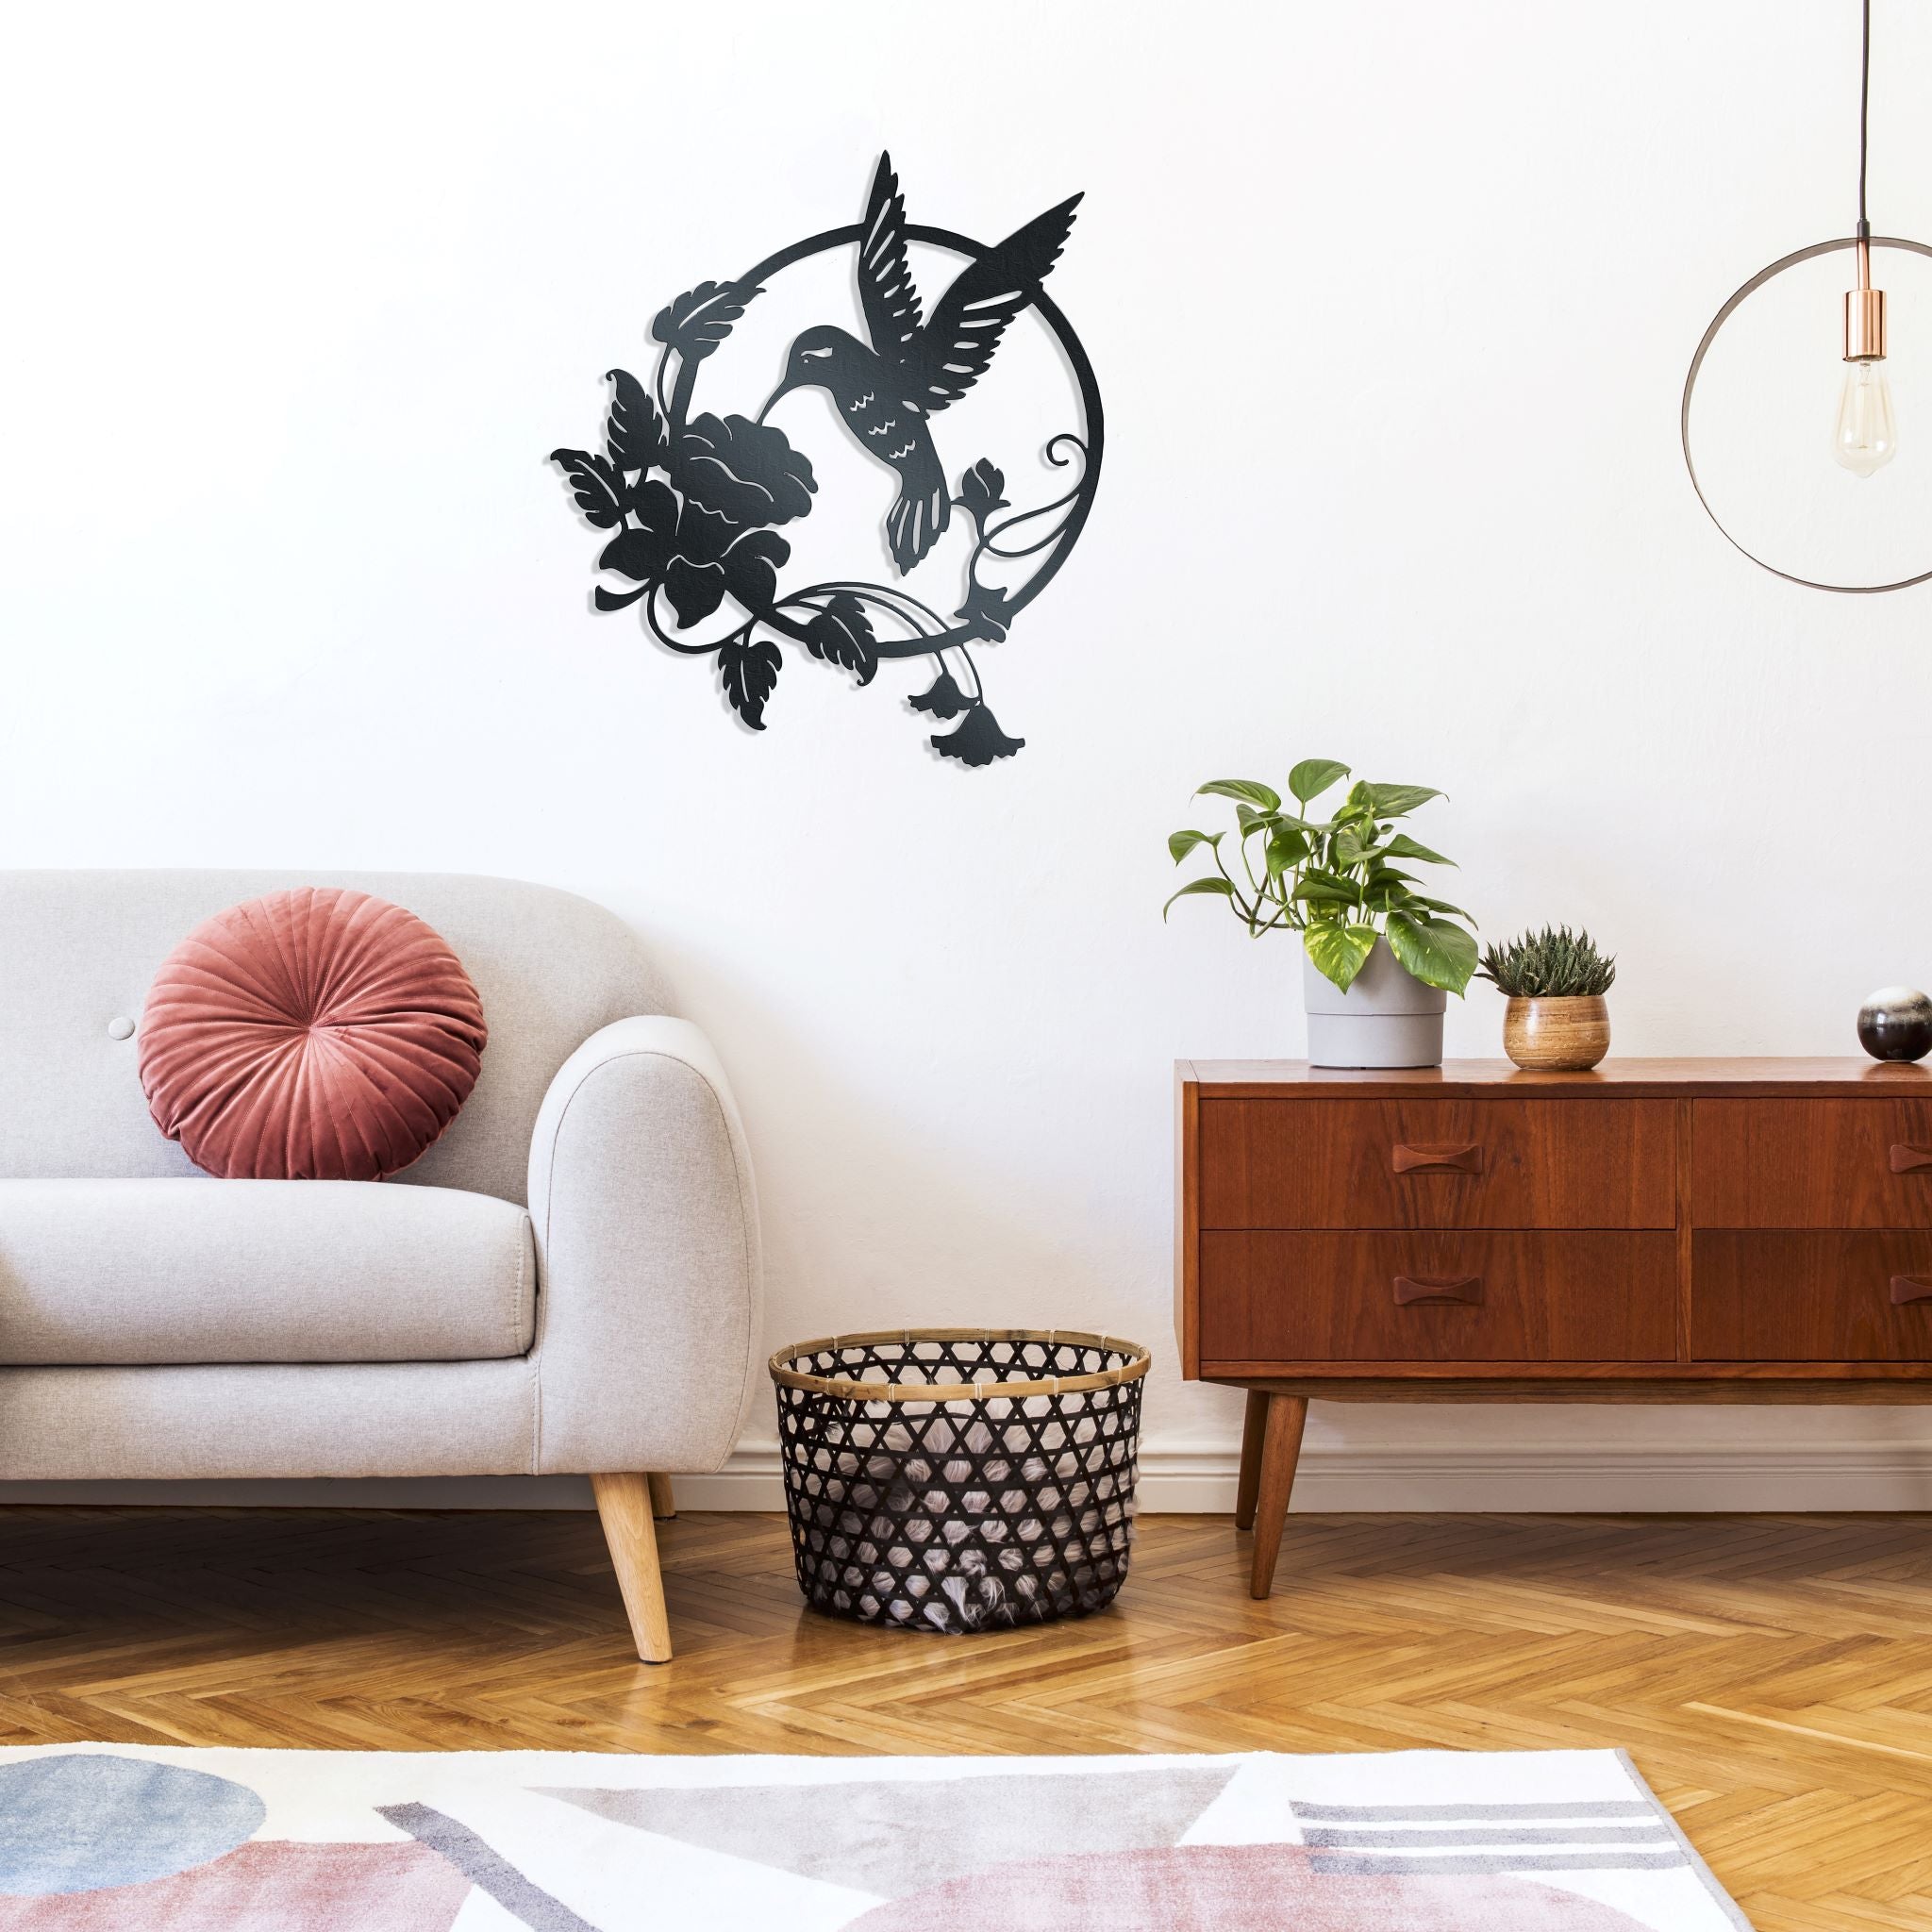 Metal wall decor of a hummingbird hovering above an open flower